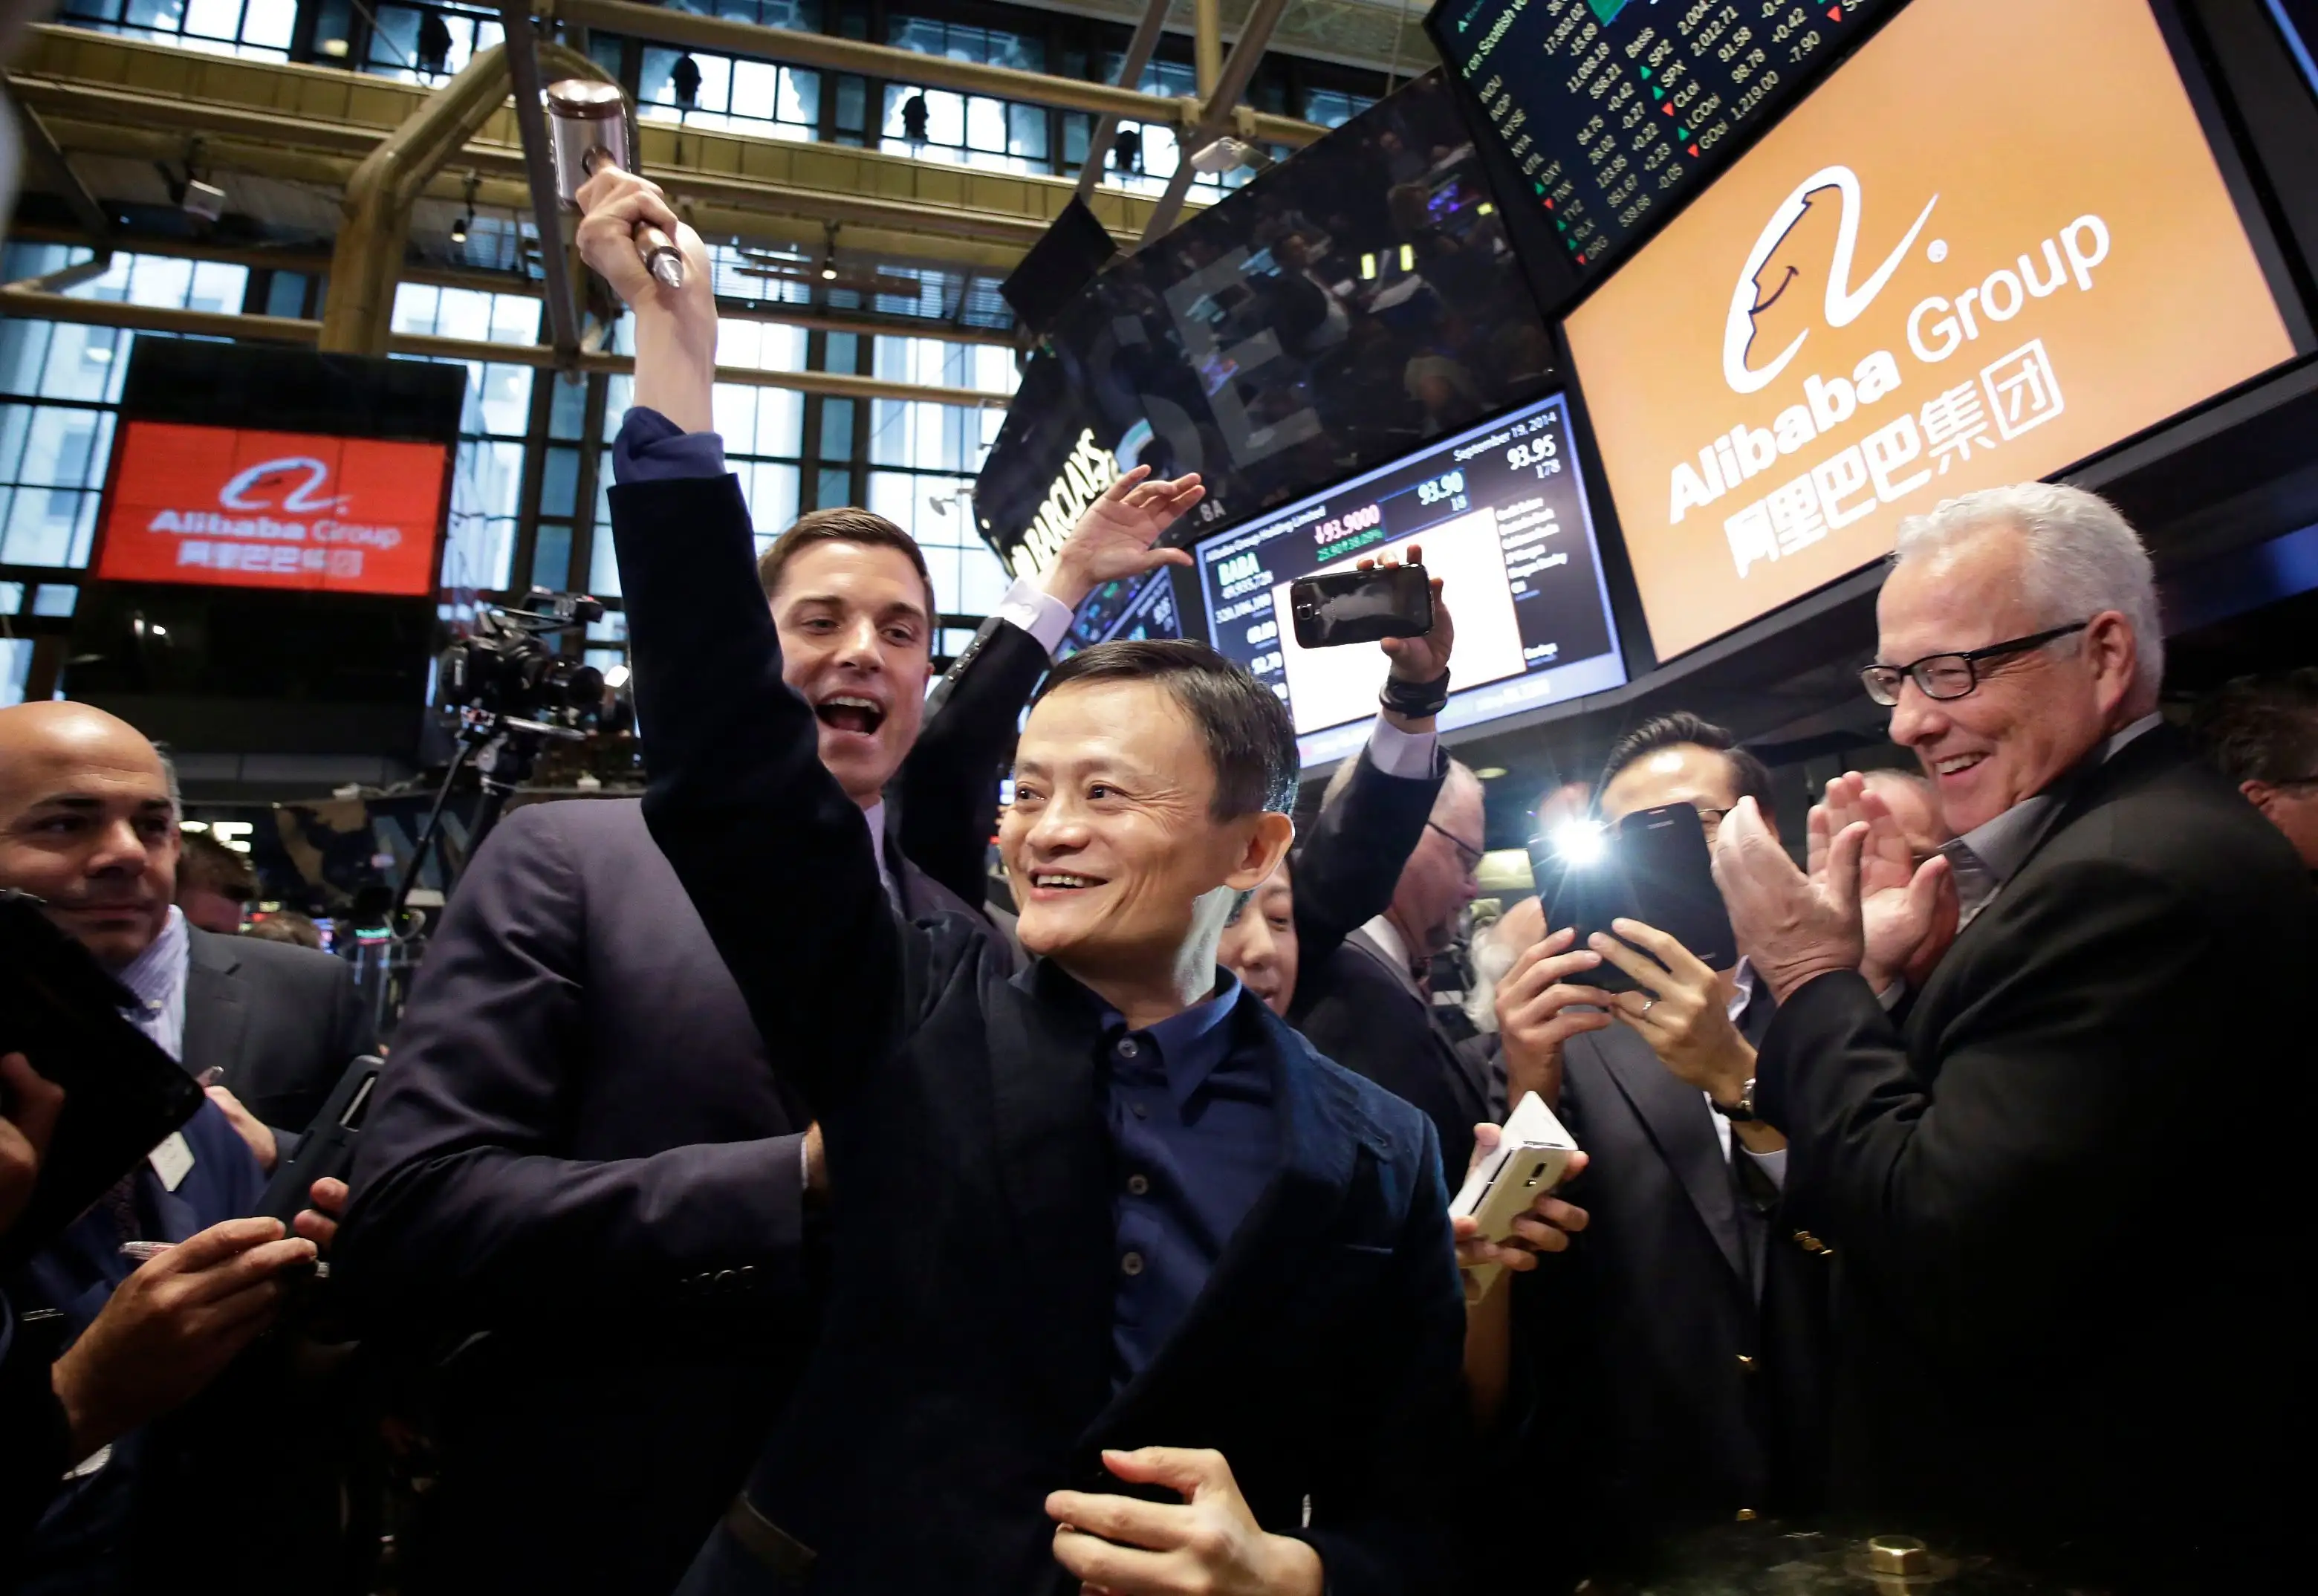 Jack Ma Alibaba founder Jack Ma, center, raises a ceremonial mallet before striking a bell during the company's IPO at the New York Stock Exchange, in New York.